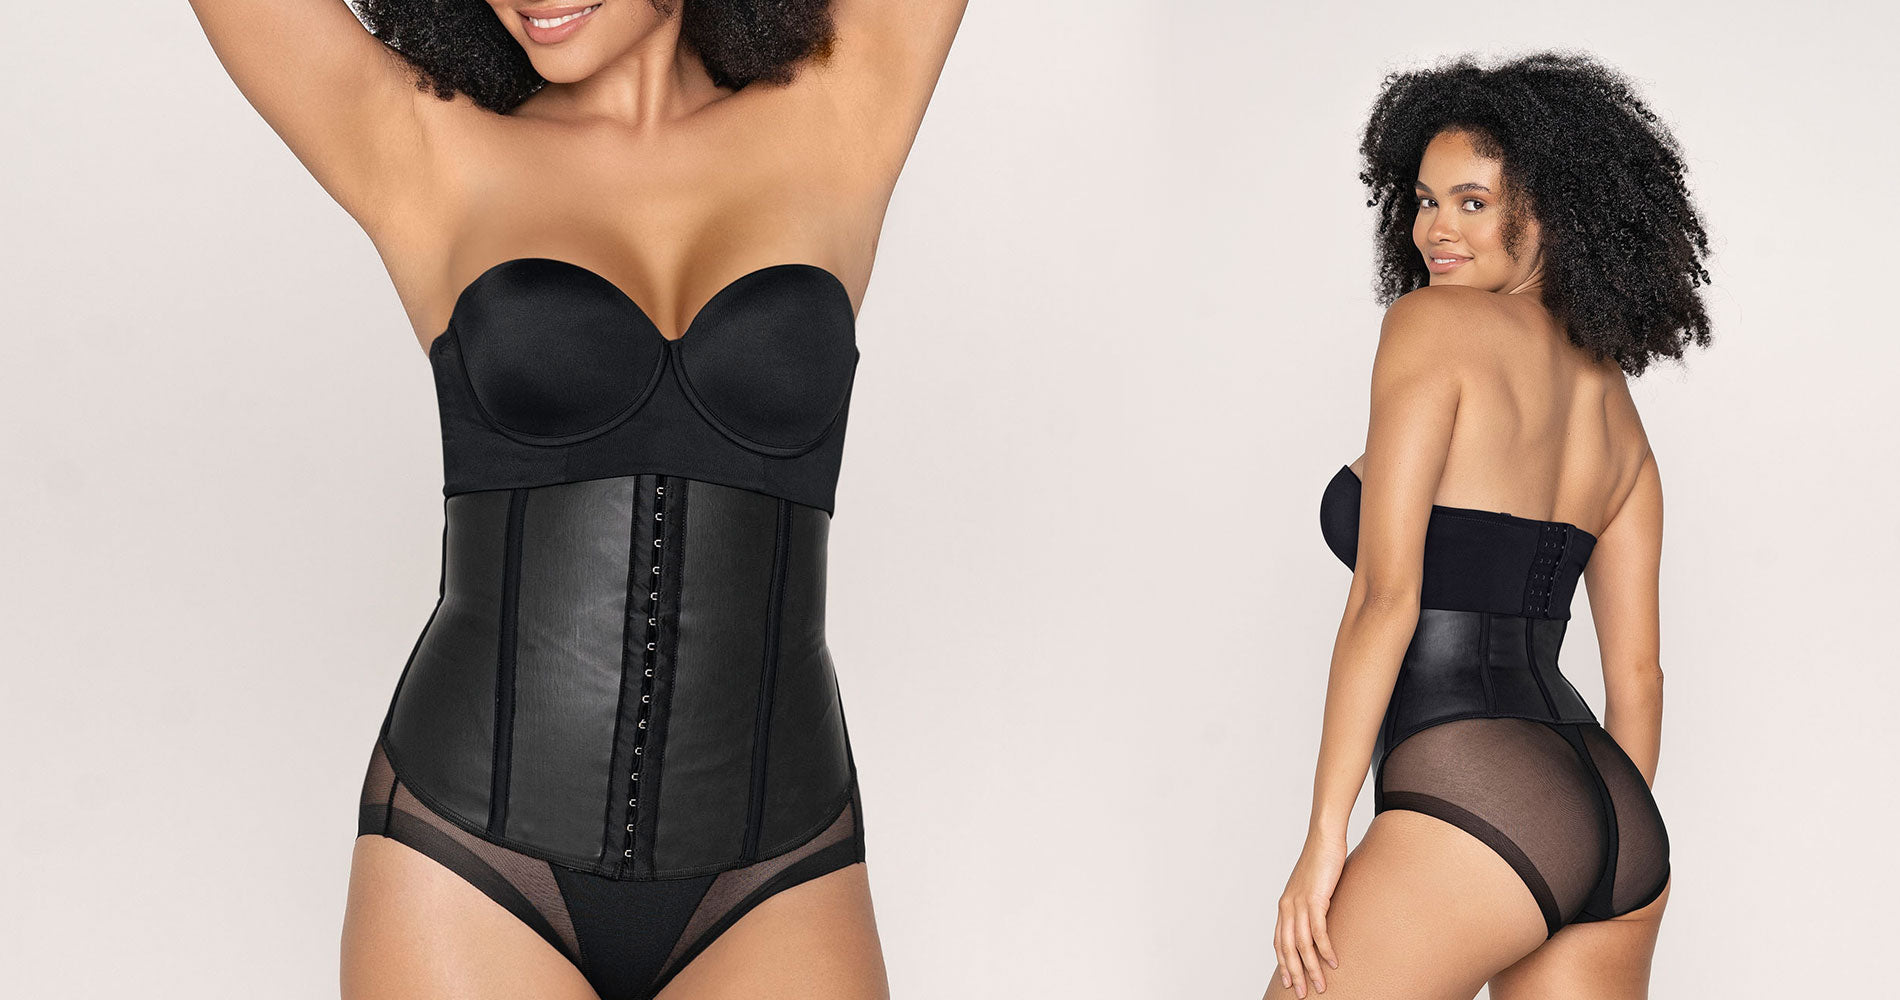 Corset Waist Training: A new benefit — focus and experimentation